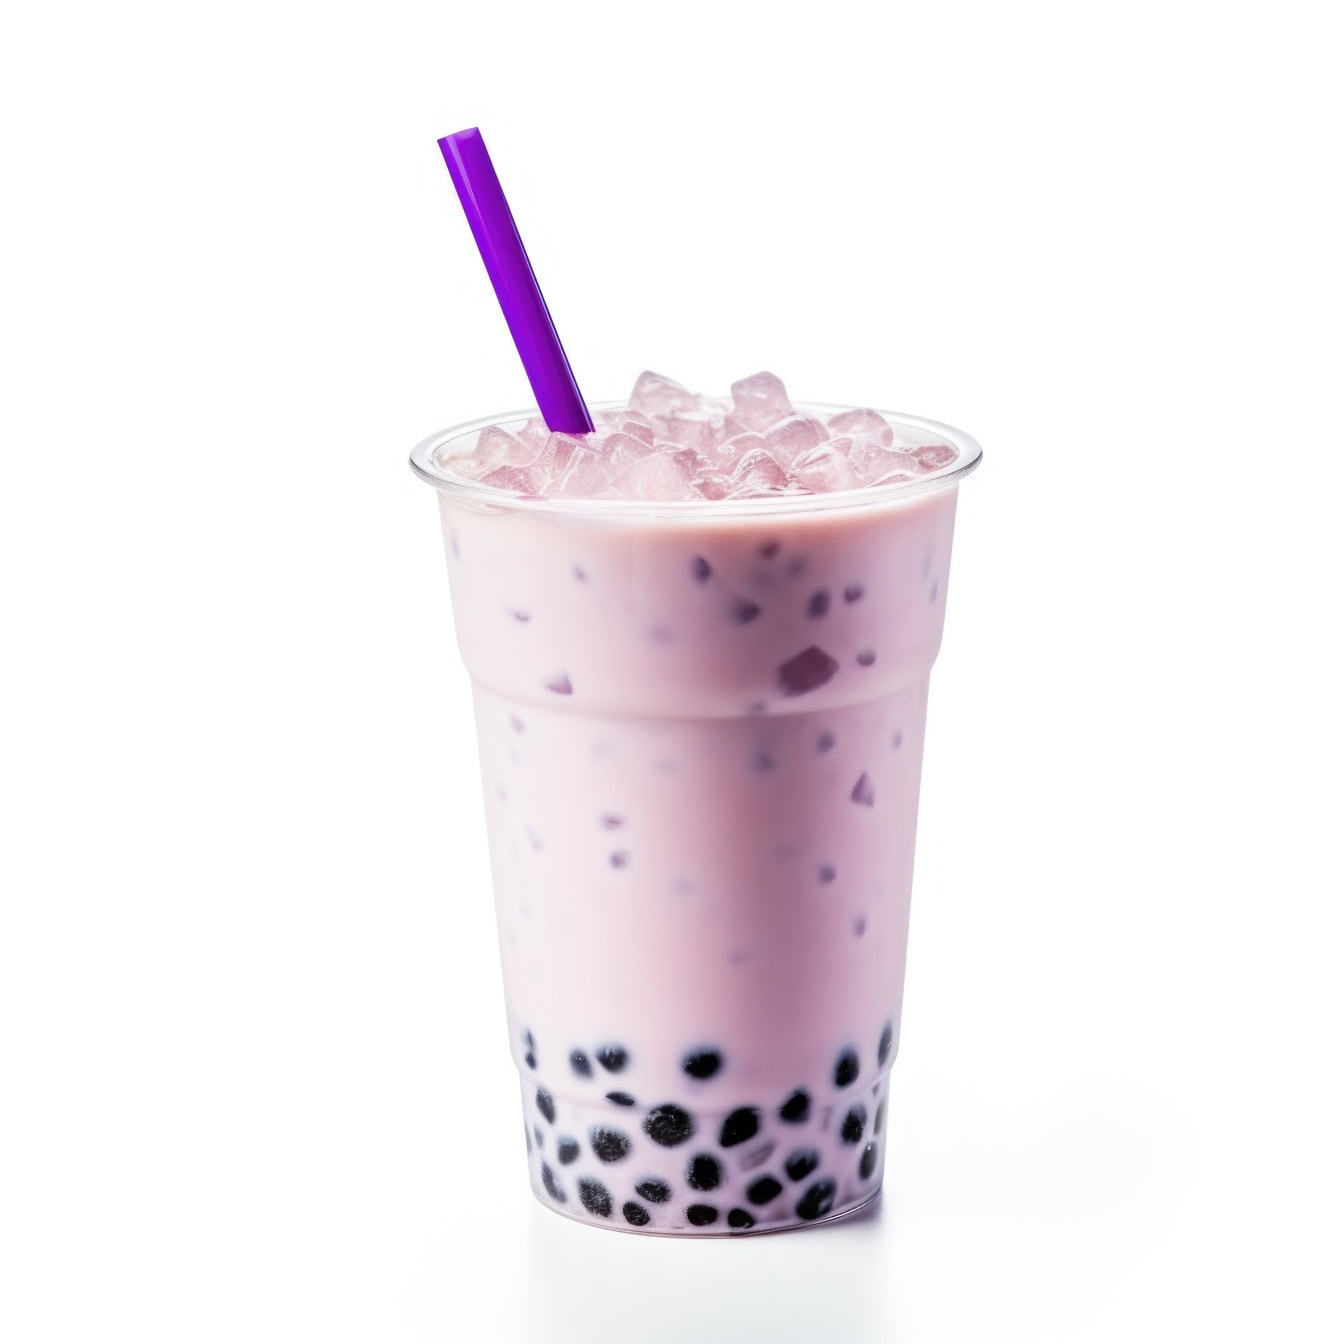 A plastic cup of fresh cold milk tea flavored Taro with sweet vanilla and ice and a purple drinking straw